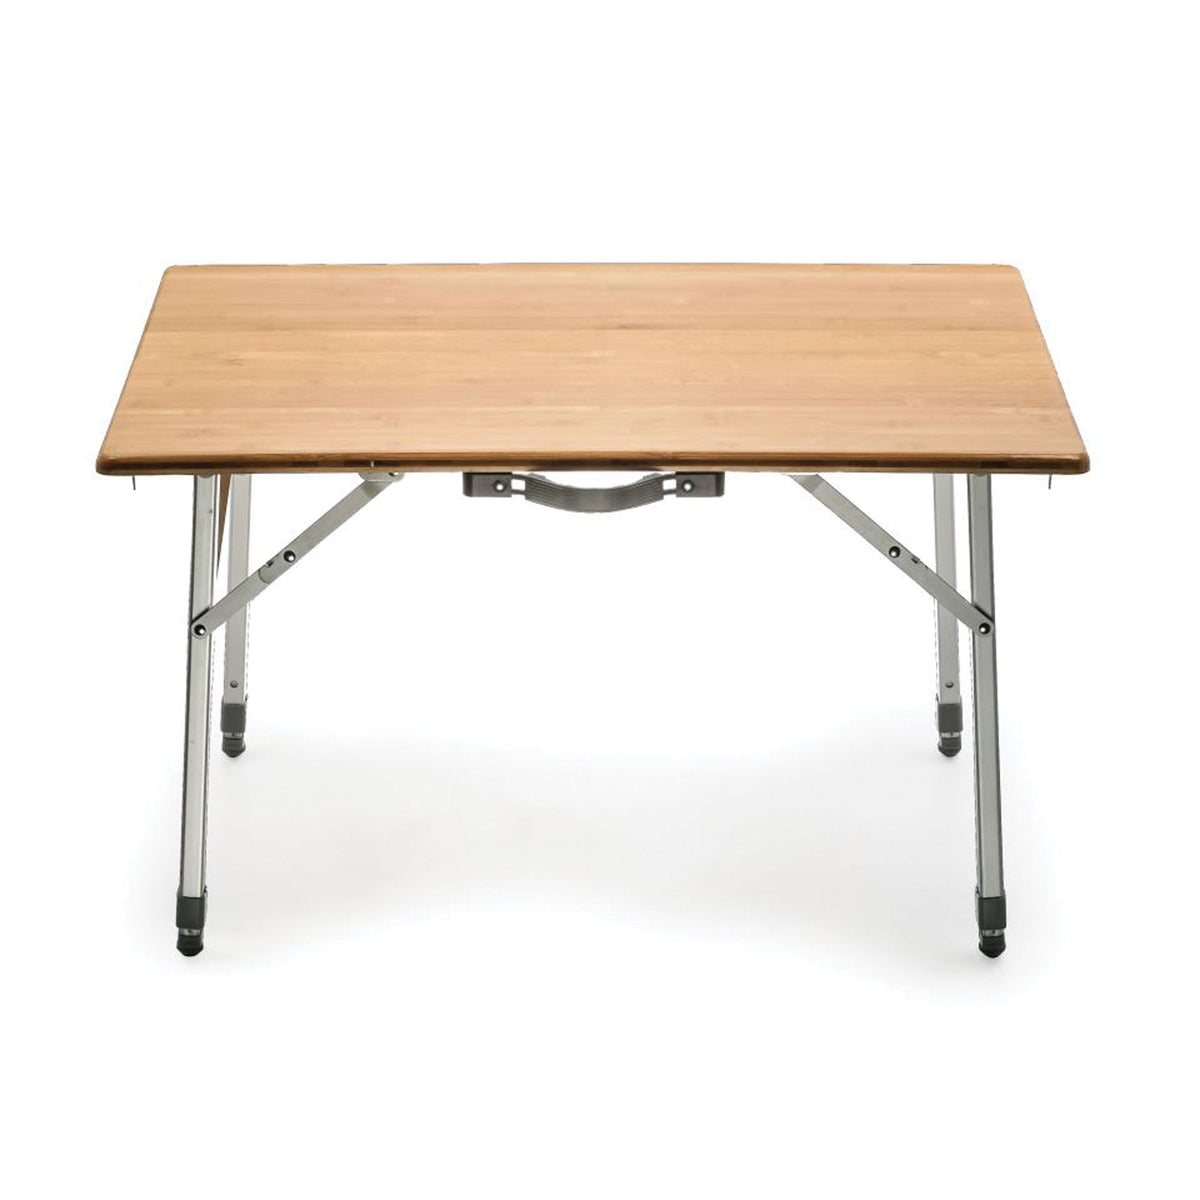 Camco 51893 Bamboo Folding Table Adjustable